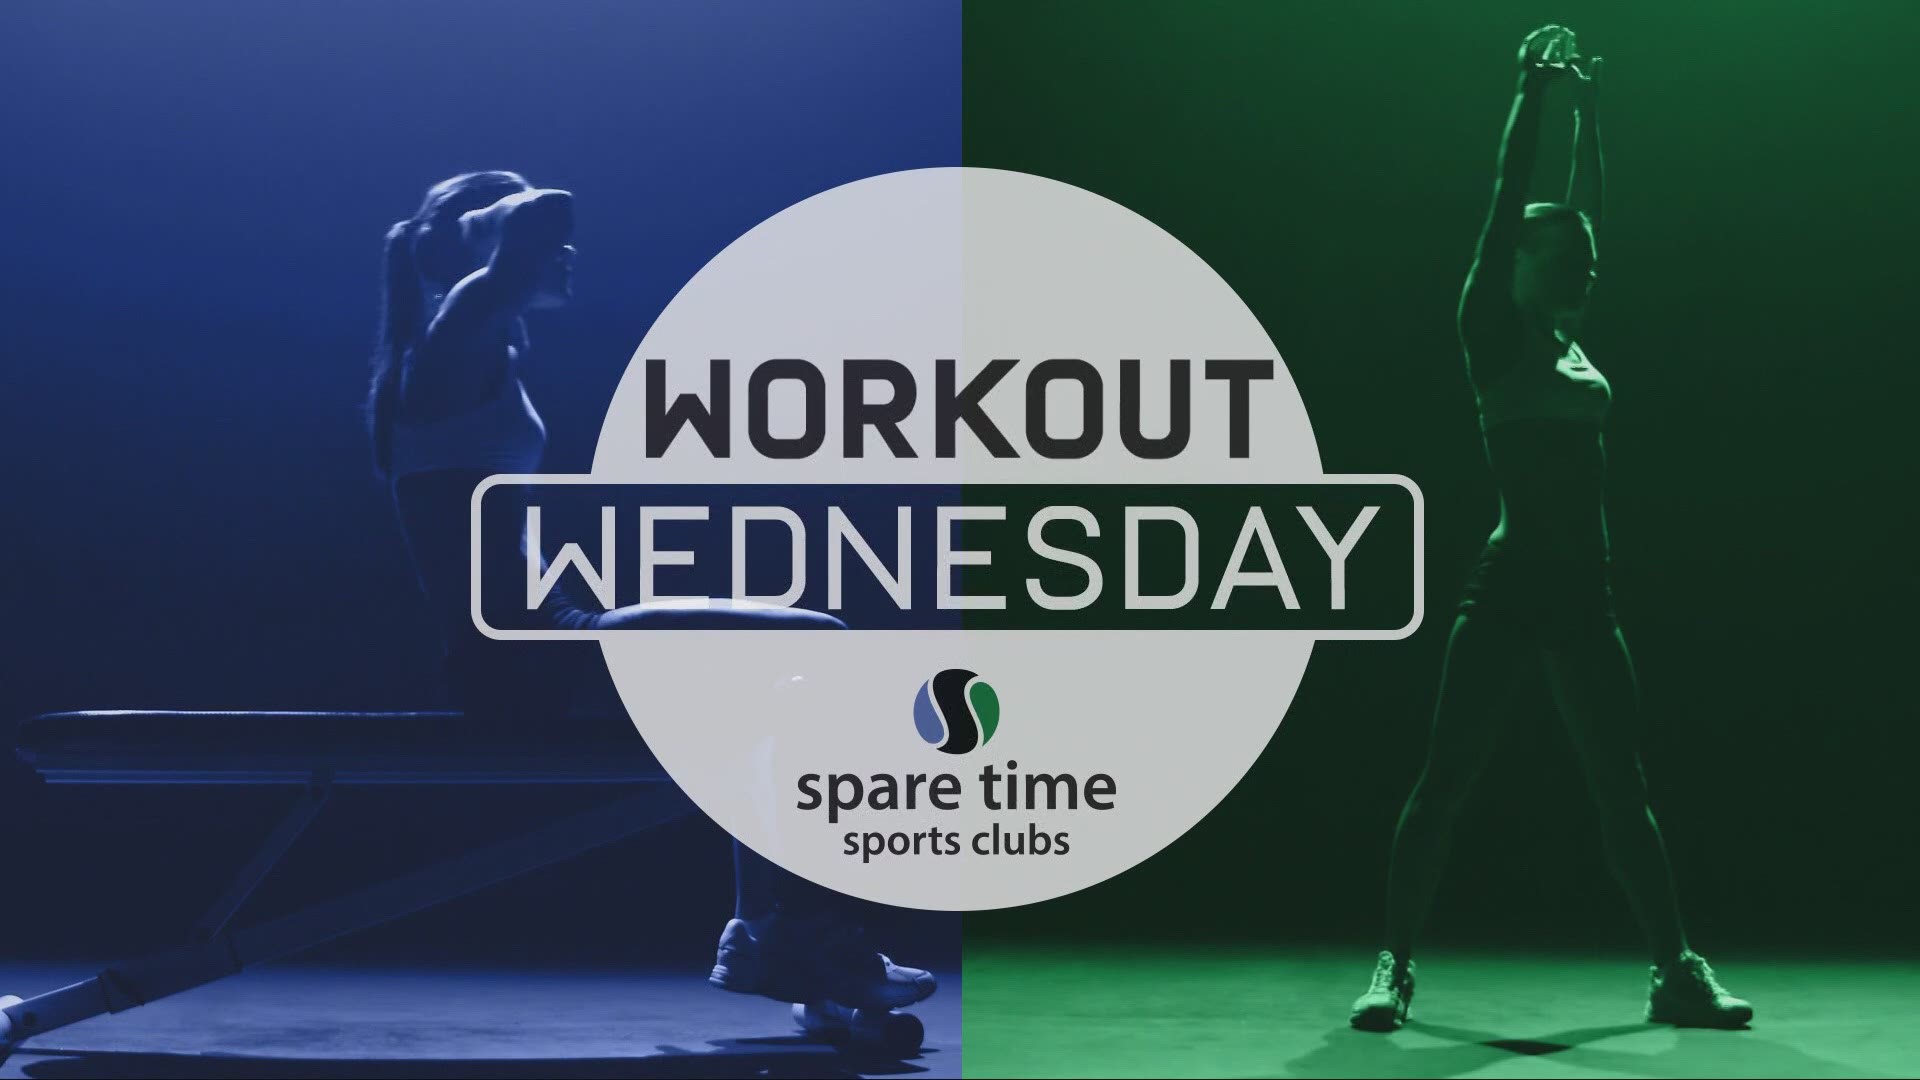 Find out how Spare Time Sports Clubs can help! The following is a paid segment sponsored by Spare Time Sports Clubs.